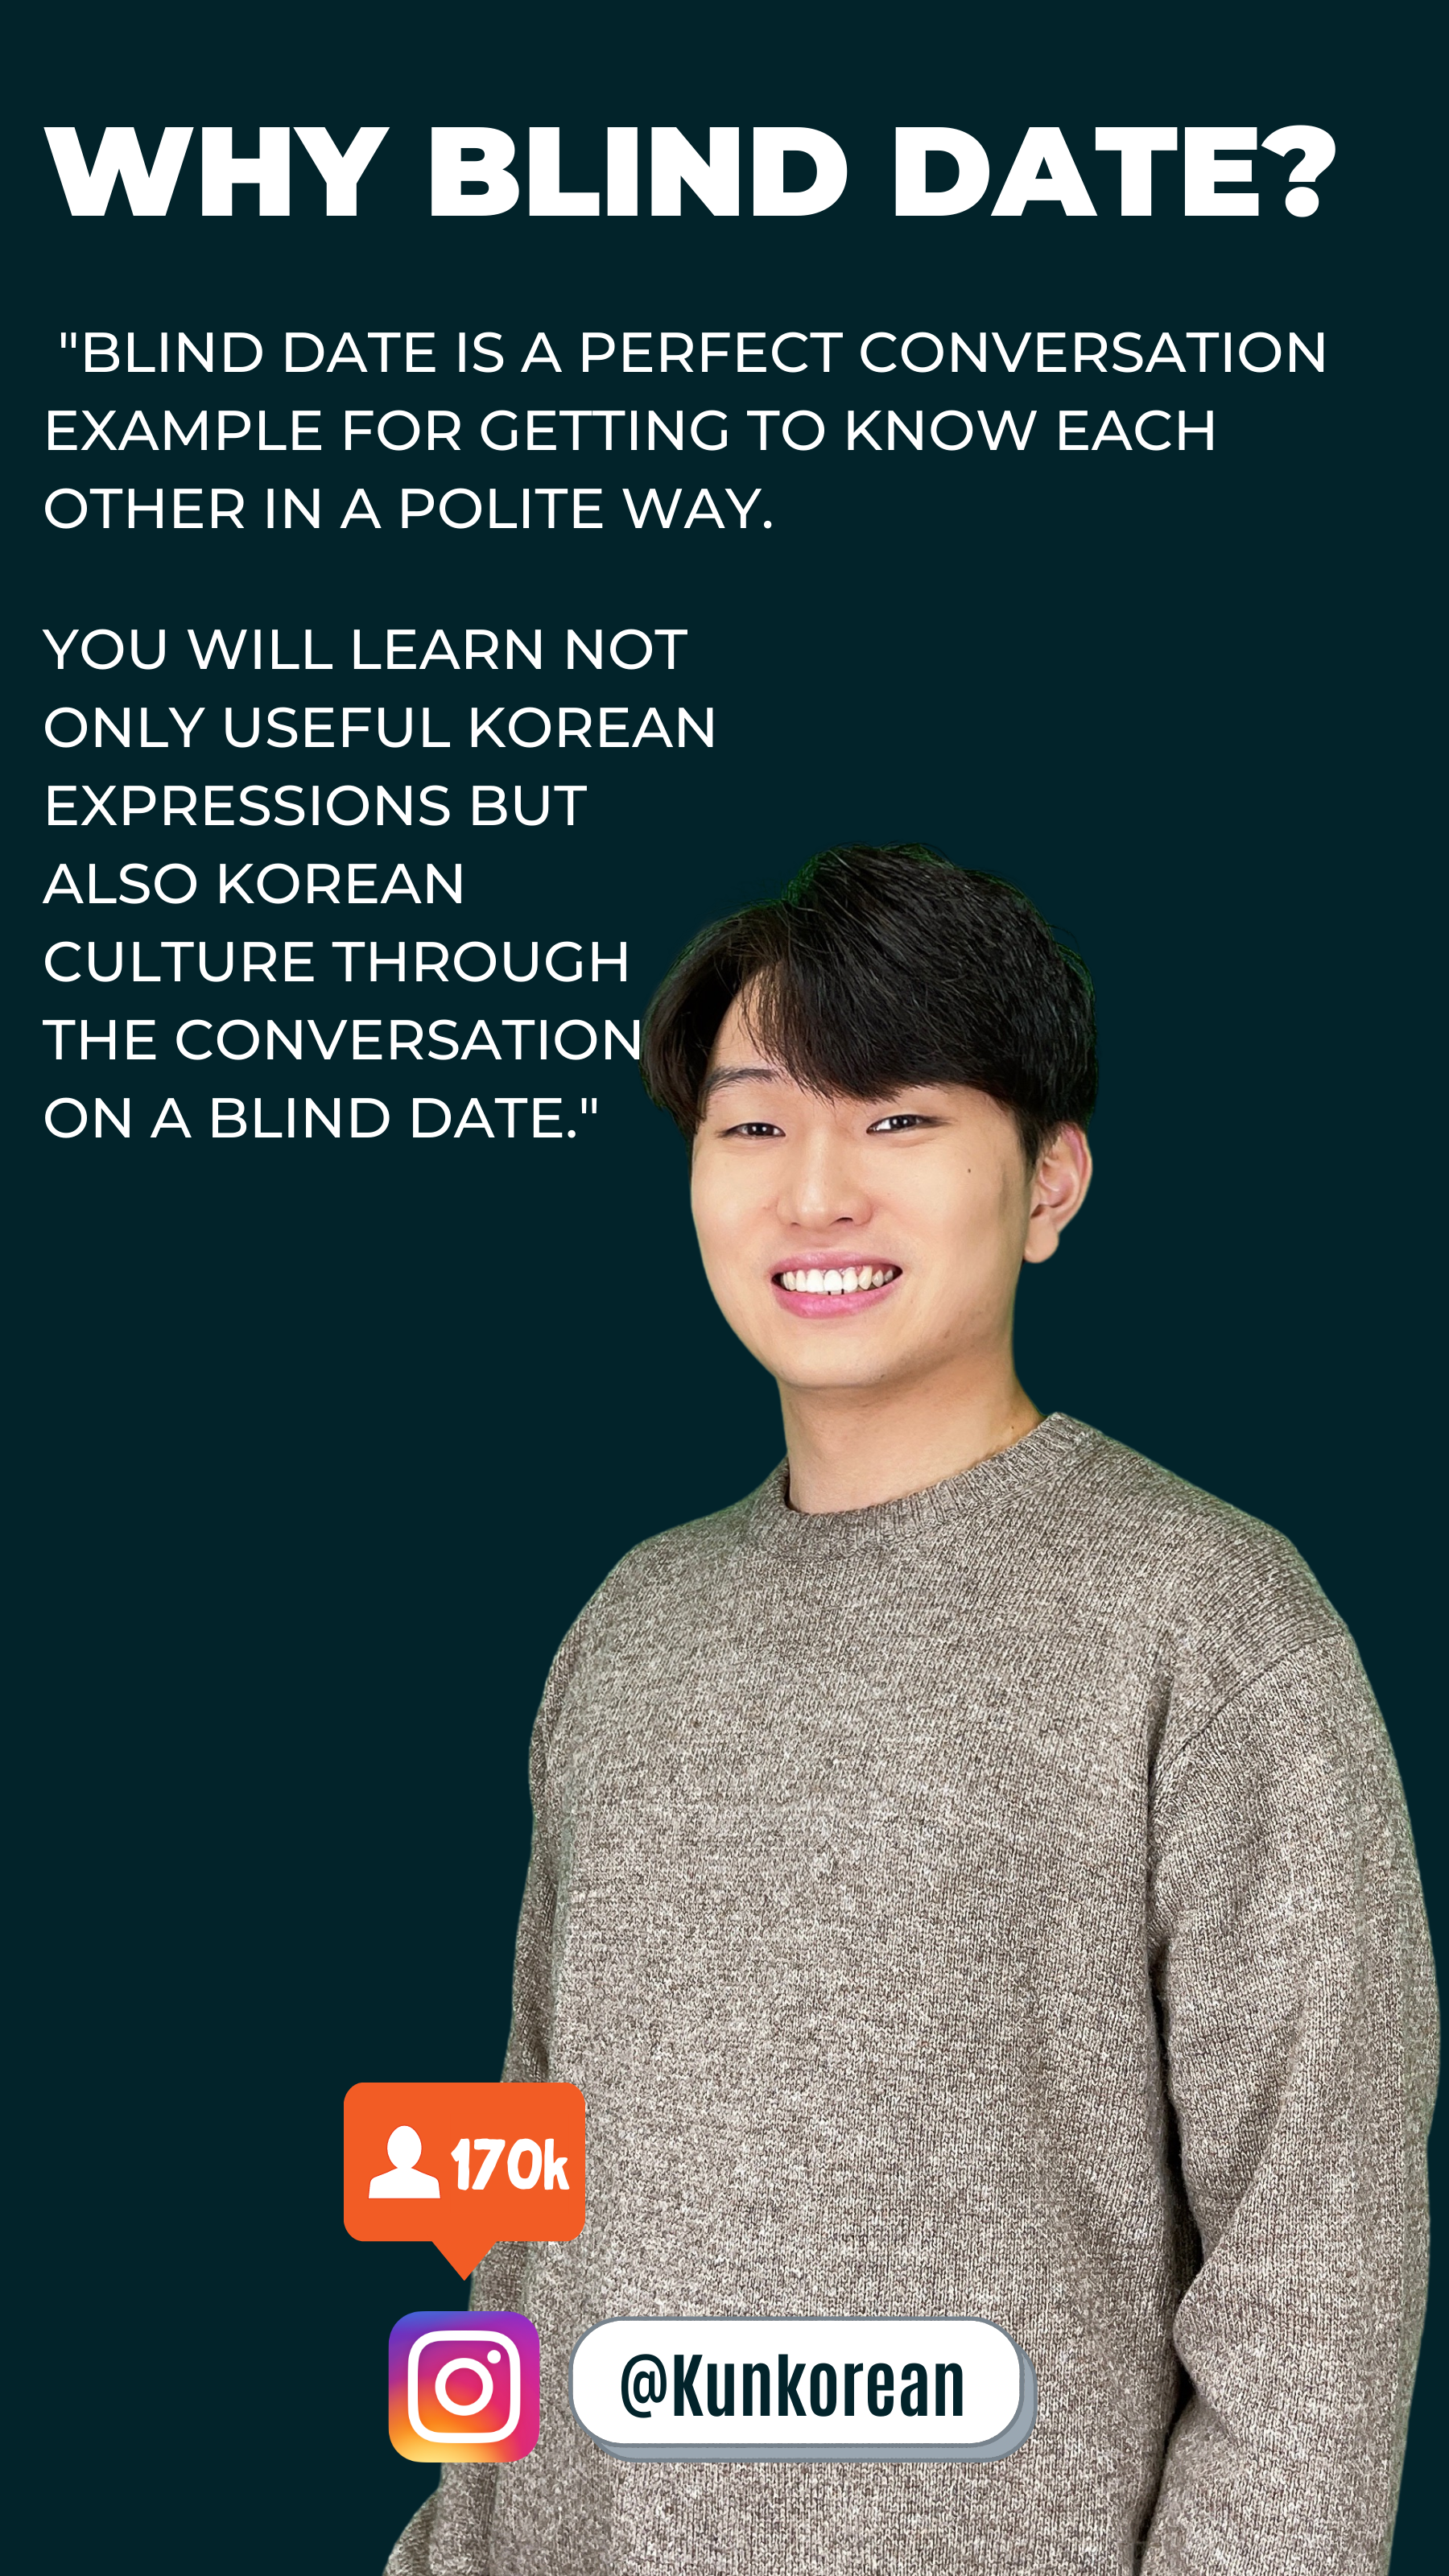 Why blind date for learning Korean? &quot;Blind date is a perfect conversation example for getting to know each other in a polite way. You will learn not only useful Korean expressions but also Korean culture through the conversation on a blind date.&quot;